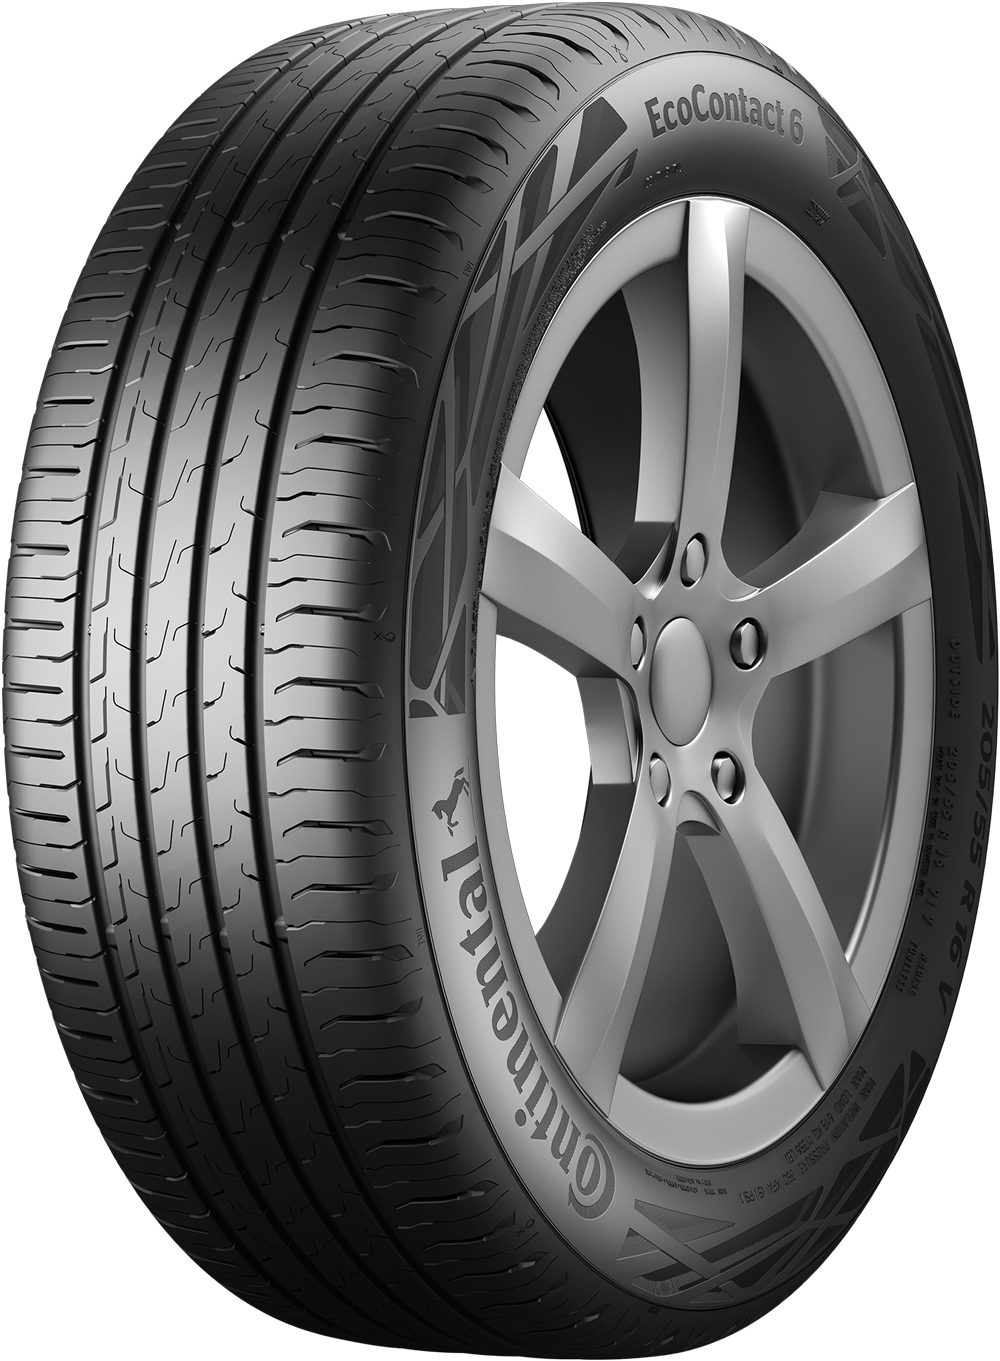 Anvelope auto CONTINENTAL ECO6XL XL 235/65 R17 108V